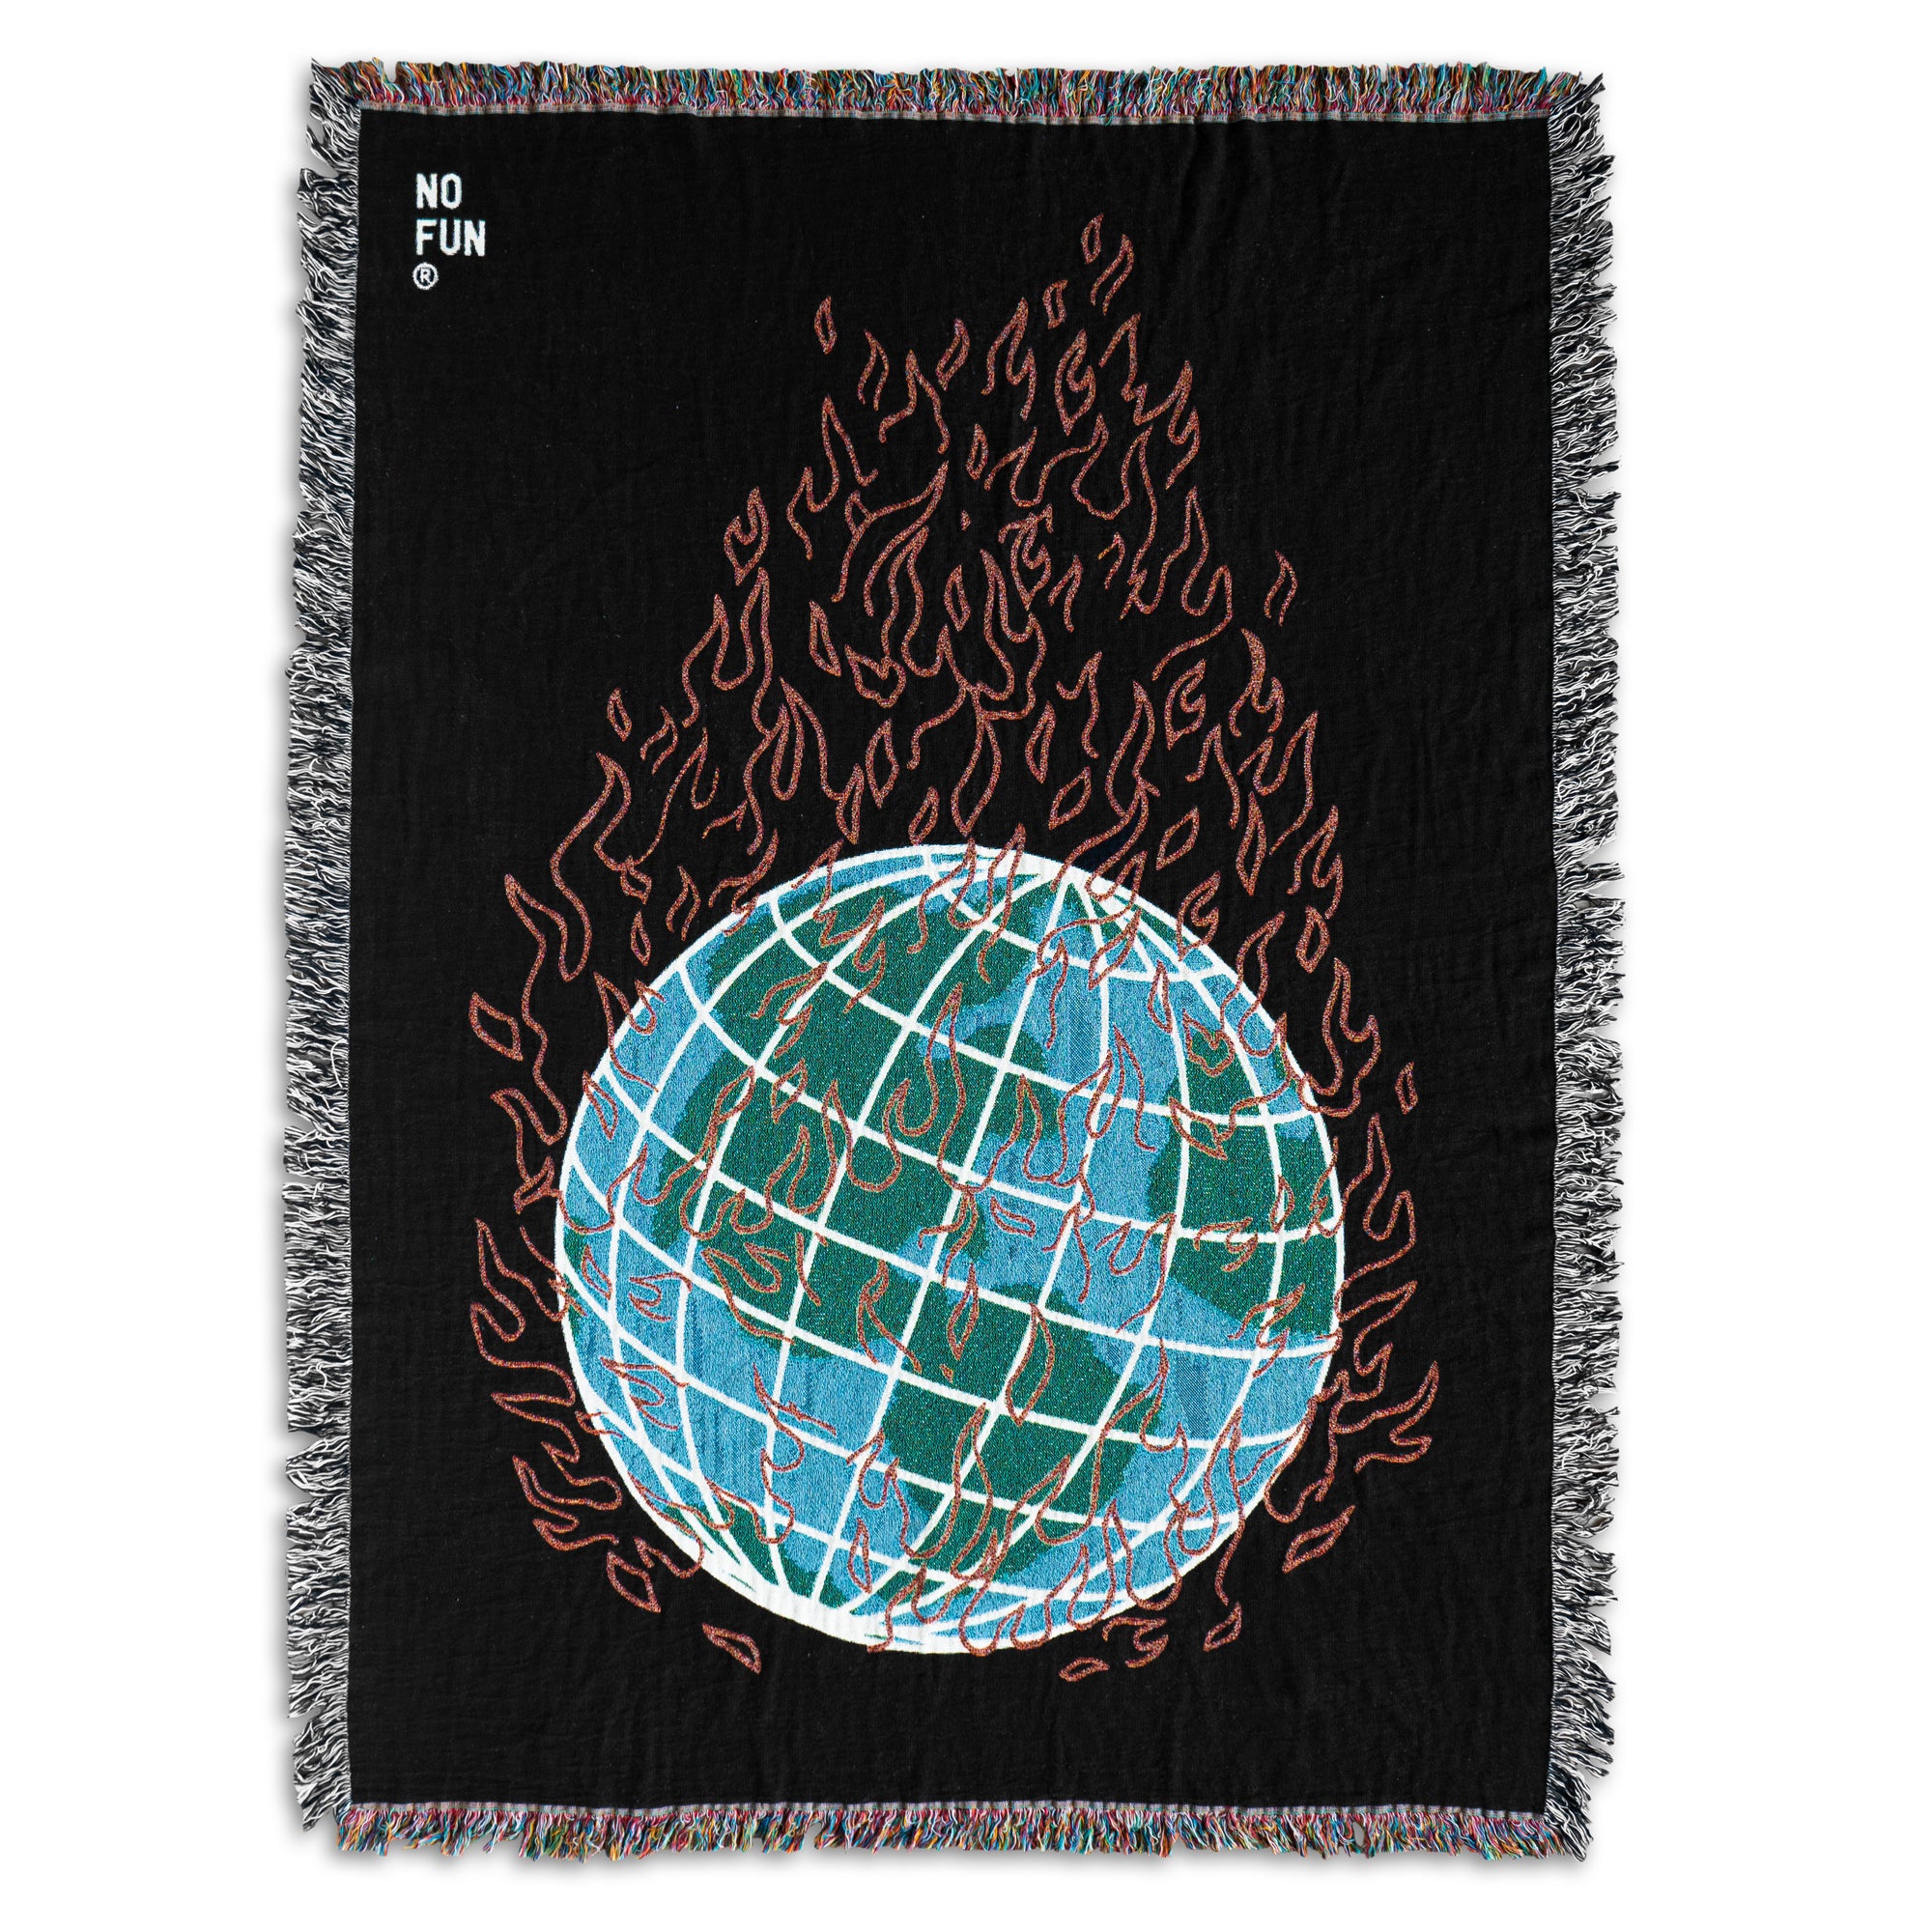 The "Global Warming" Woven Blanket by No Fun®.  The blanket is black, and features a globe in the center engulfed in flames.  The globe is blue and green, and the flames are red.  There is a small "No Fun®" logo found in the top left hand corner of the product.